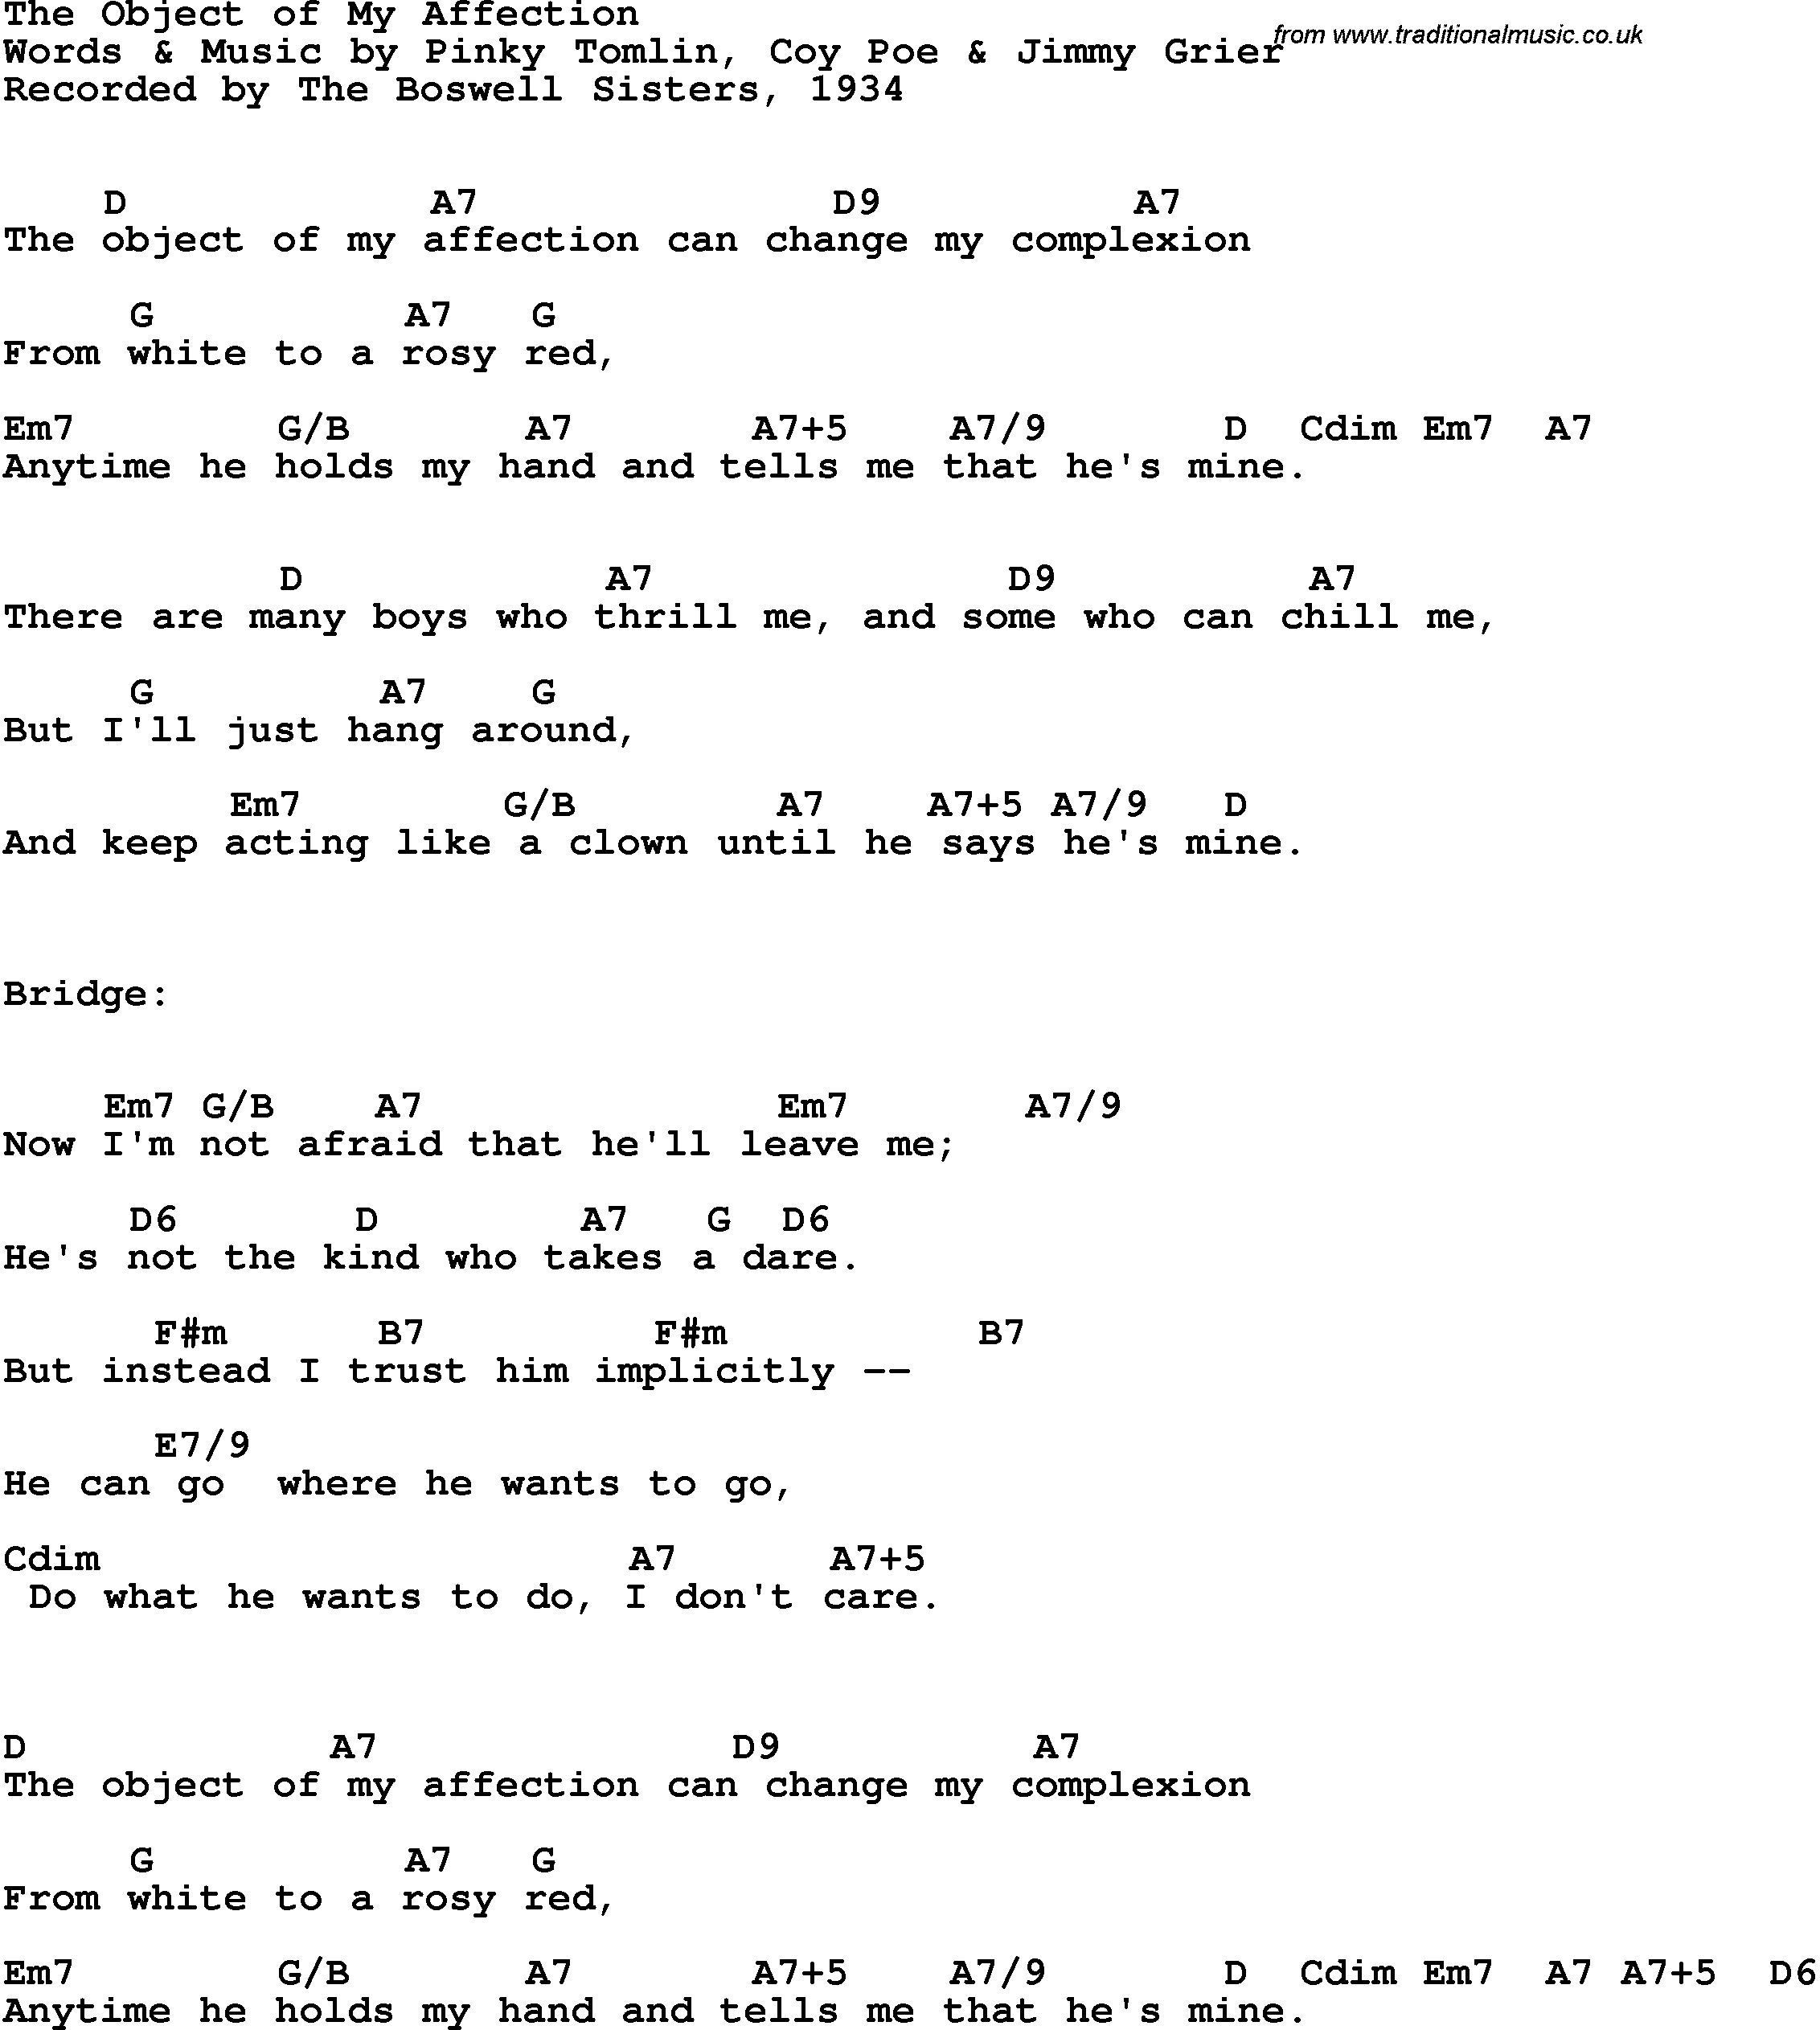 Song Lyrics with guitar chords for Object Of My Affection, The - The Boswell Sisters, 1934